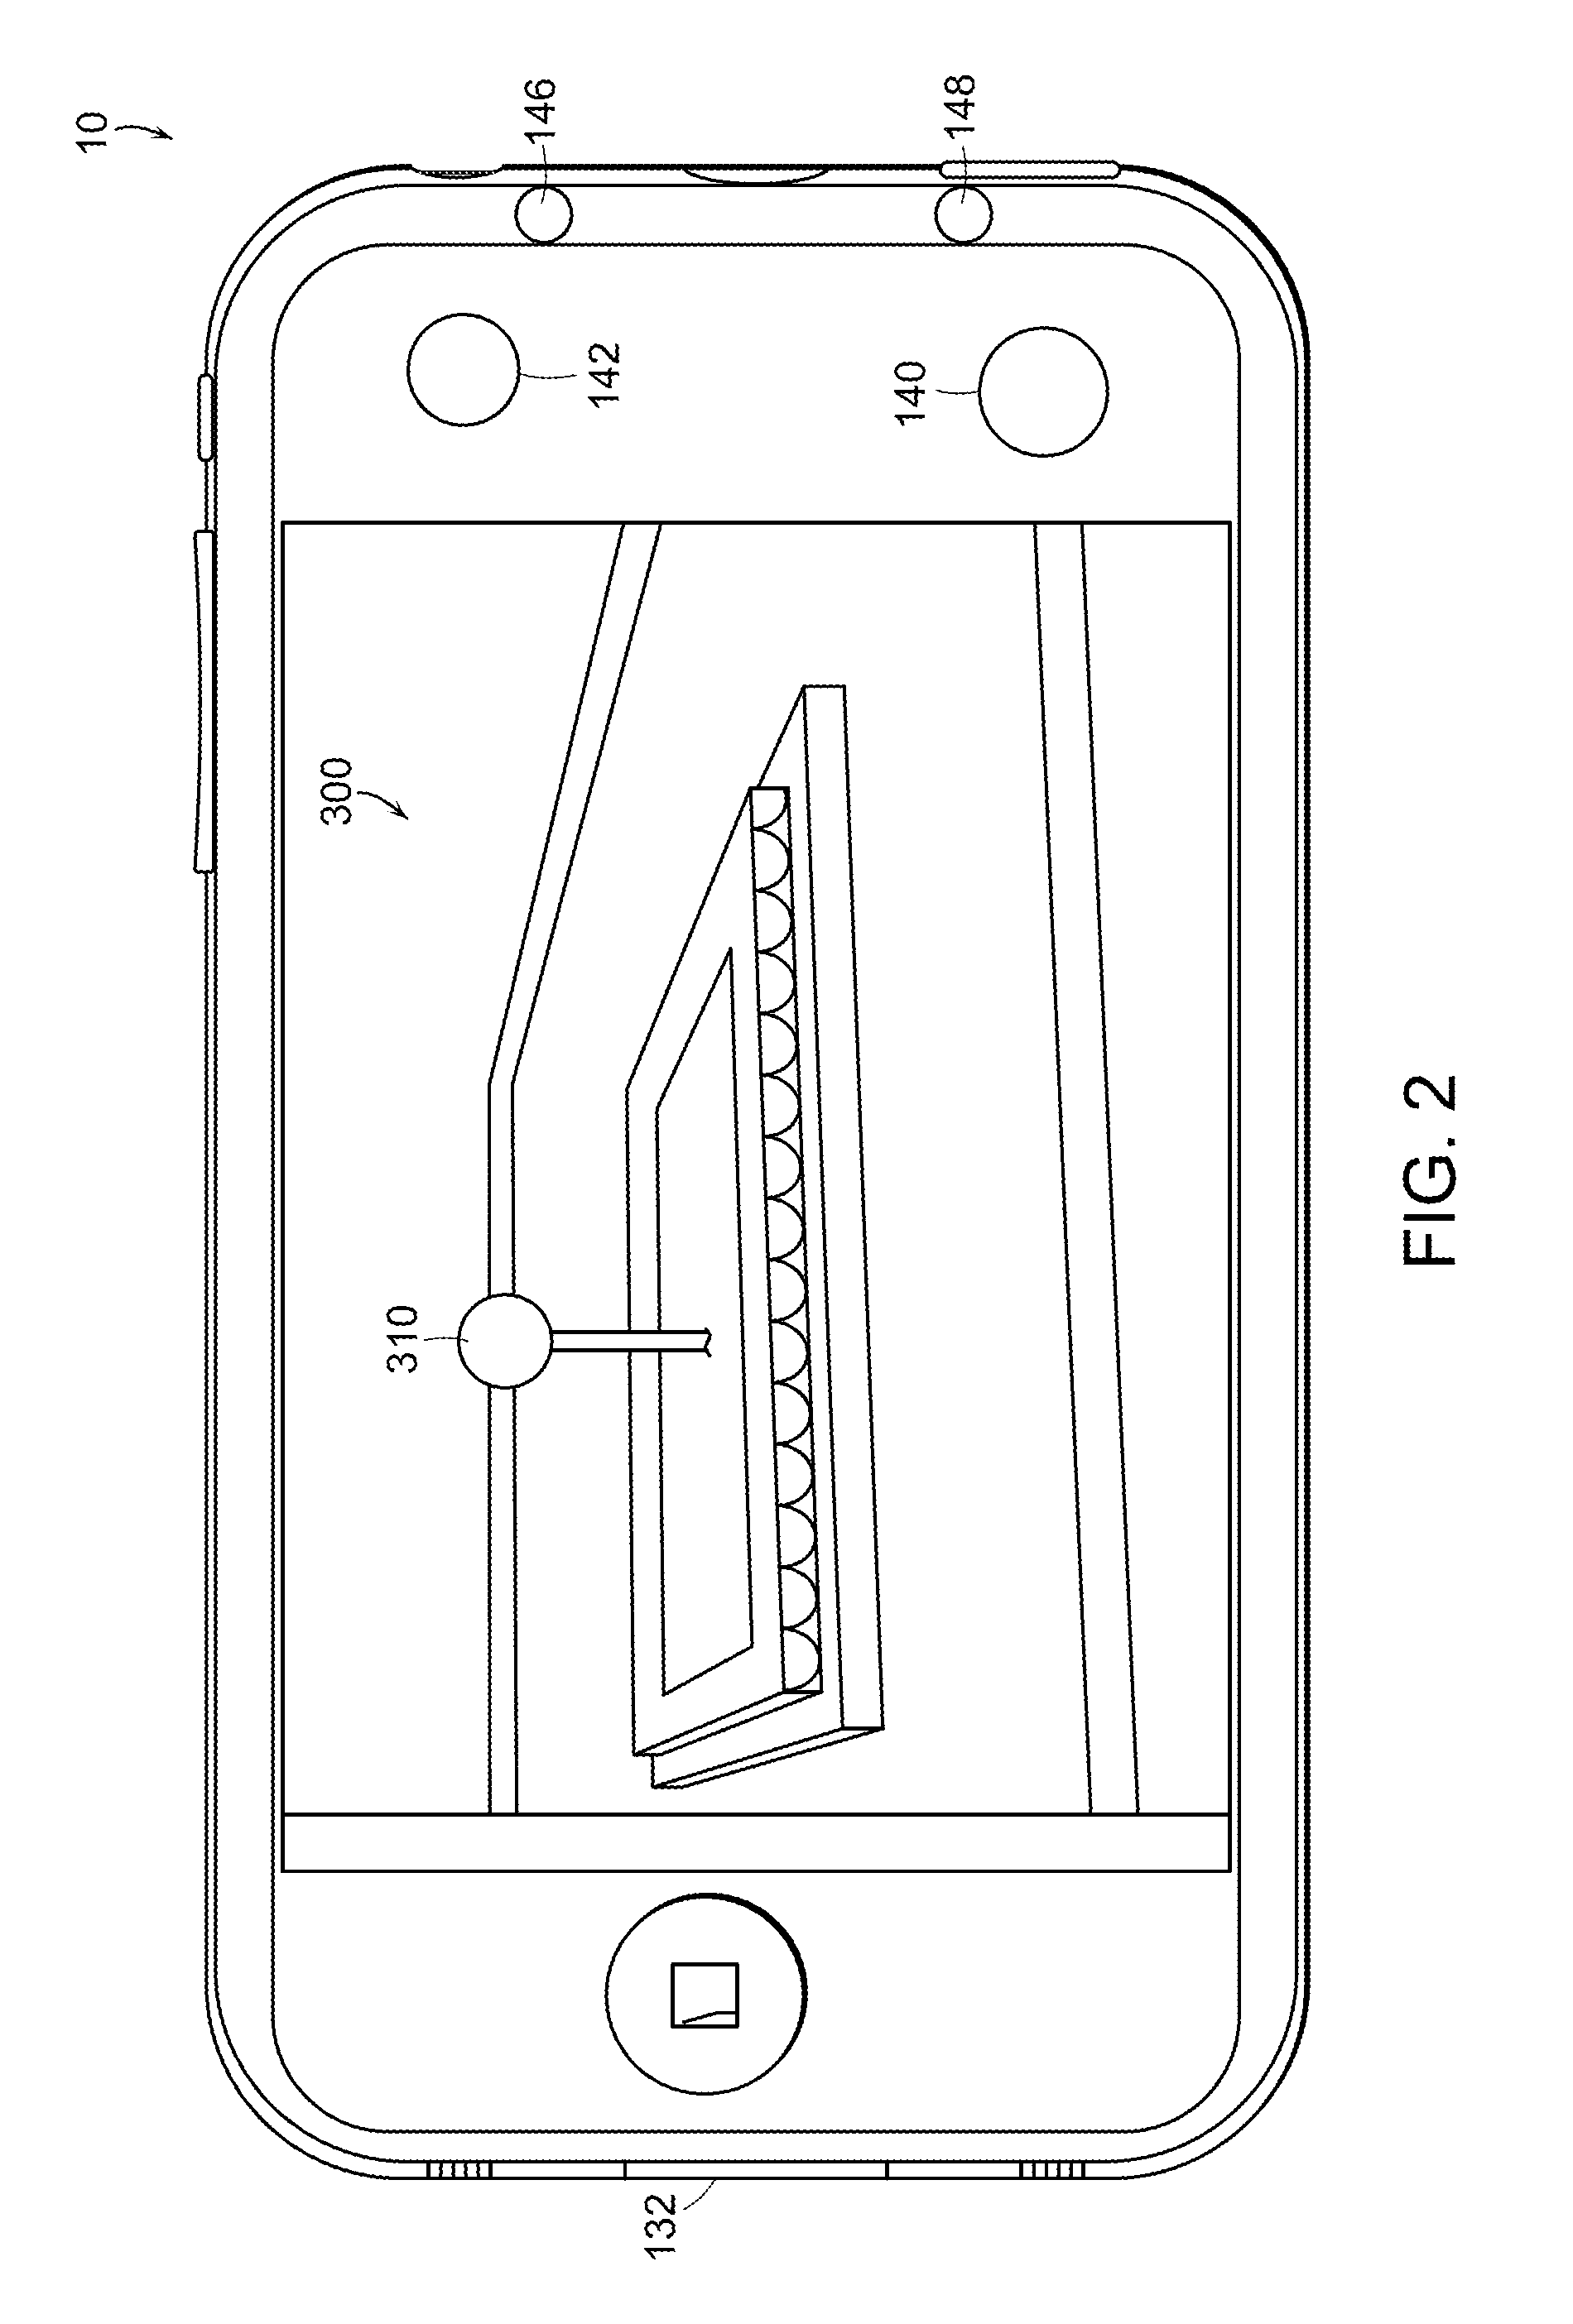 System and Method for Creating an Environment and for Sharing a Location Based Experience in an Environment